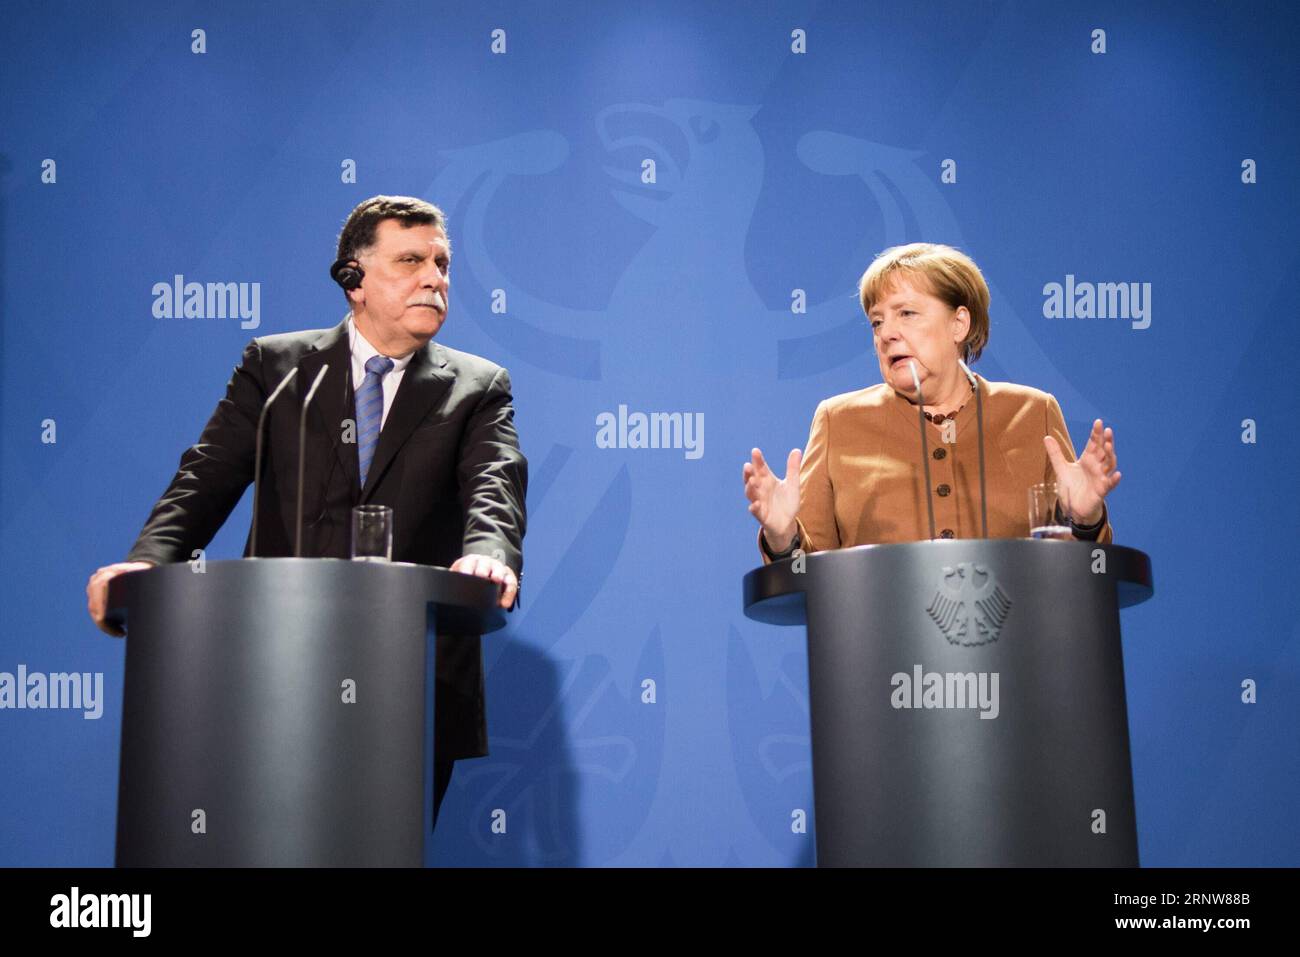 Bilder des Tages (171207) -- BERLIN, Dec. 7, 2017 -- German Chancellor Angela Merkel (R) addresses a press conference with visiting Libyan UN-backed Prime Minister Fayez al-Sarraj in Berlin, Germany, on Dec. 7, 2017. Merkel, after talks with Fayez al-Sarraj on Thursday, urged the Libyan authorities to improve the conditions of migrants in the North African country and pledged more support from the European Union. ) GERMANY-BERLIN-CHANCELLOR-LIBYA-UN-BACKED PM-MEETING ZhangxYuan PUBLICATIONxNOTxINxCHN Stock Photo